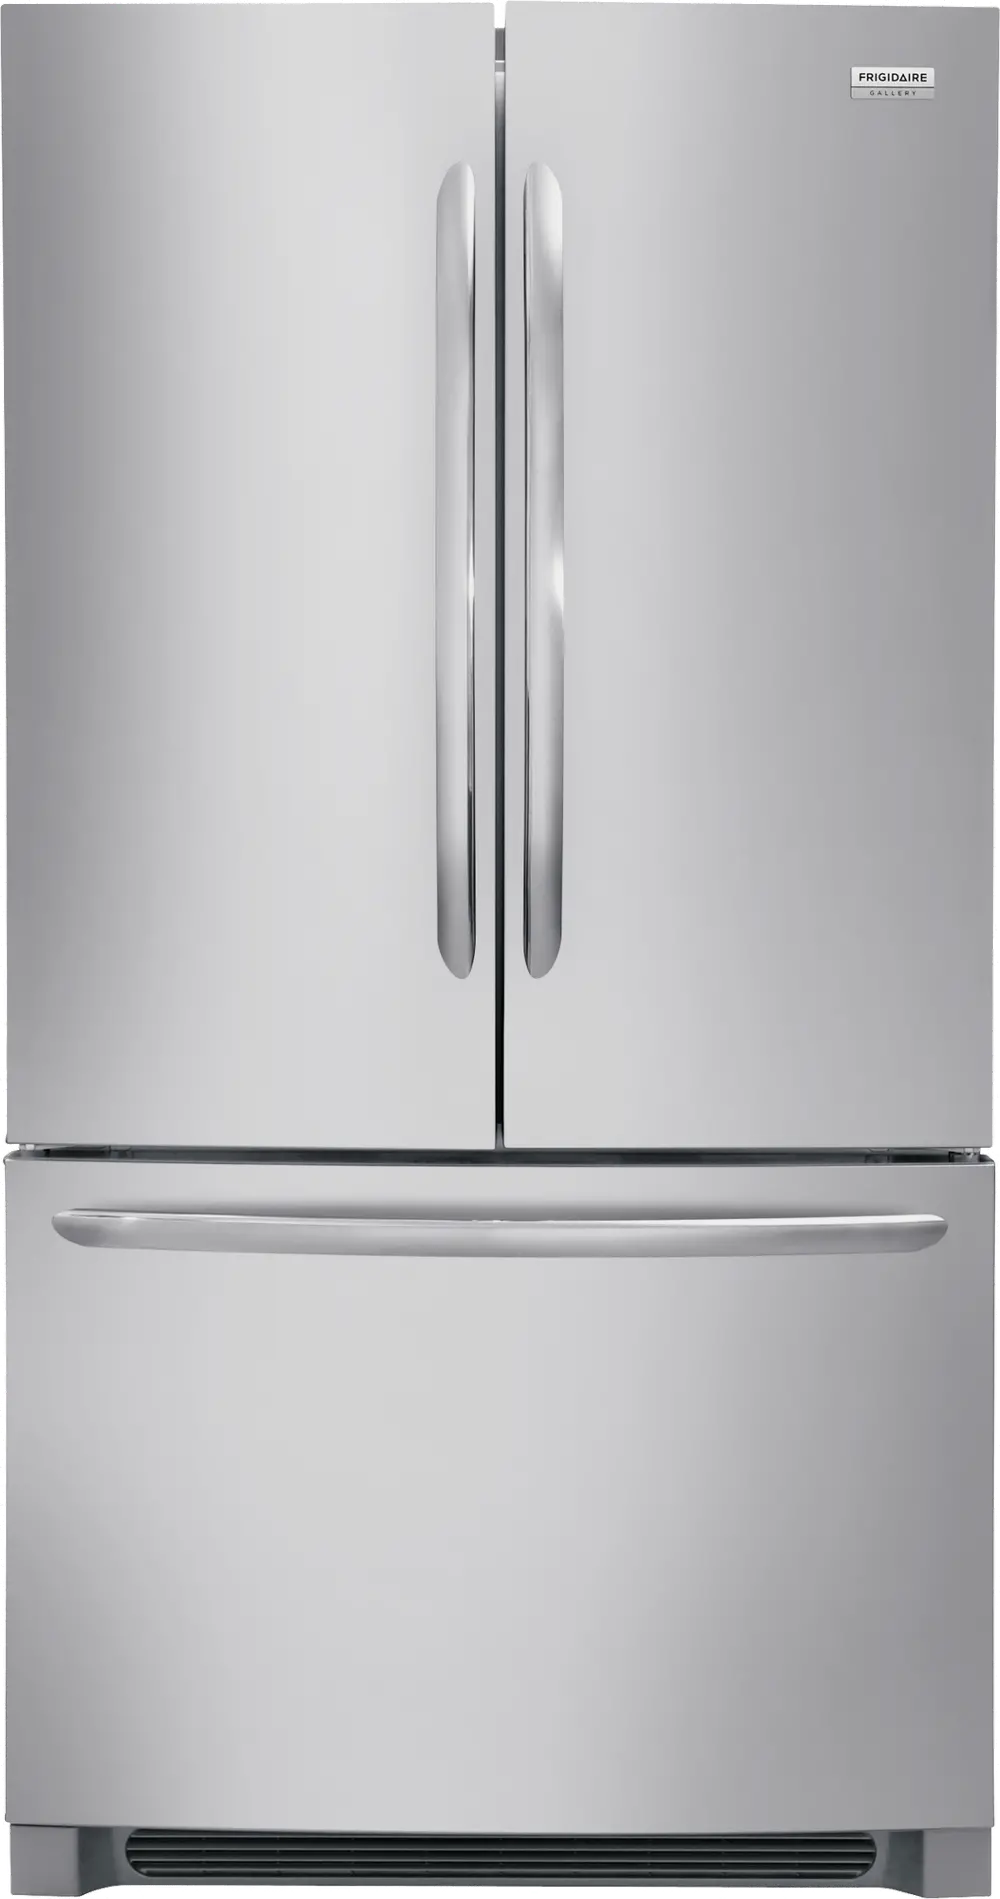 FGHG2368TF Frigidaire Gallery Counter Depth French Door Refrigerator - 22.4 cu. ft., 36 inch Stainless Steel-1